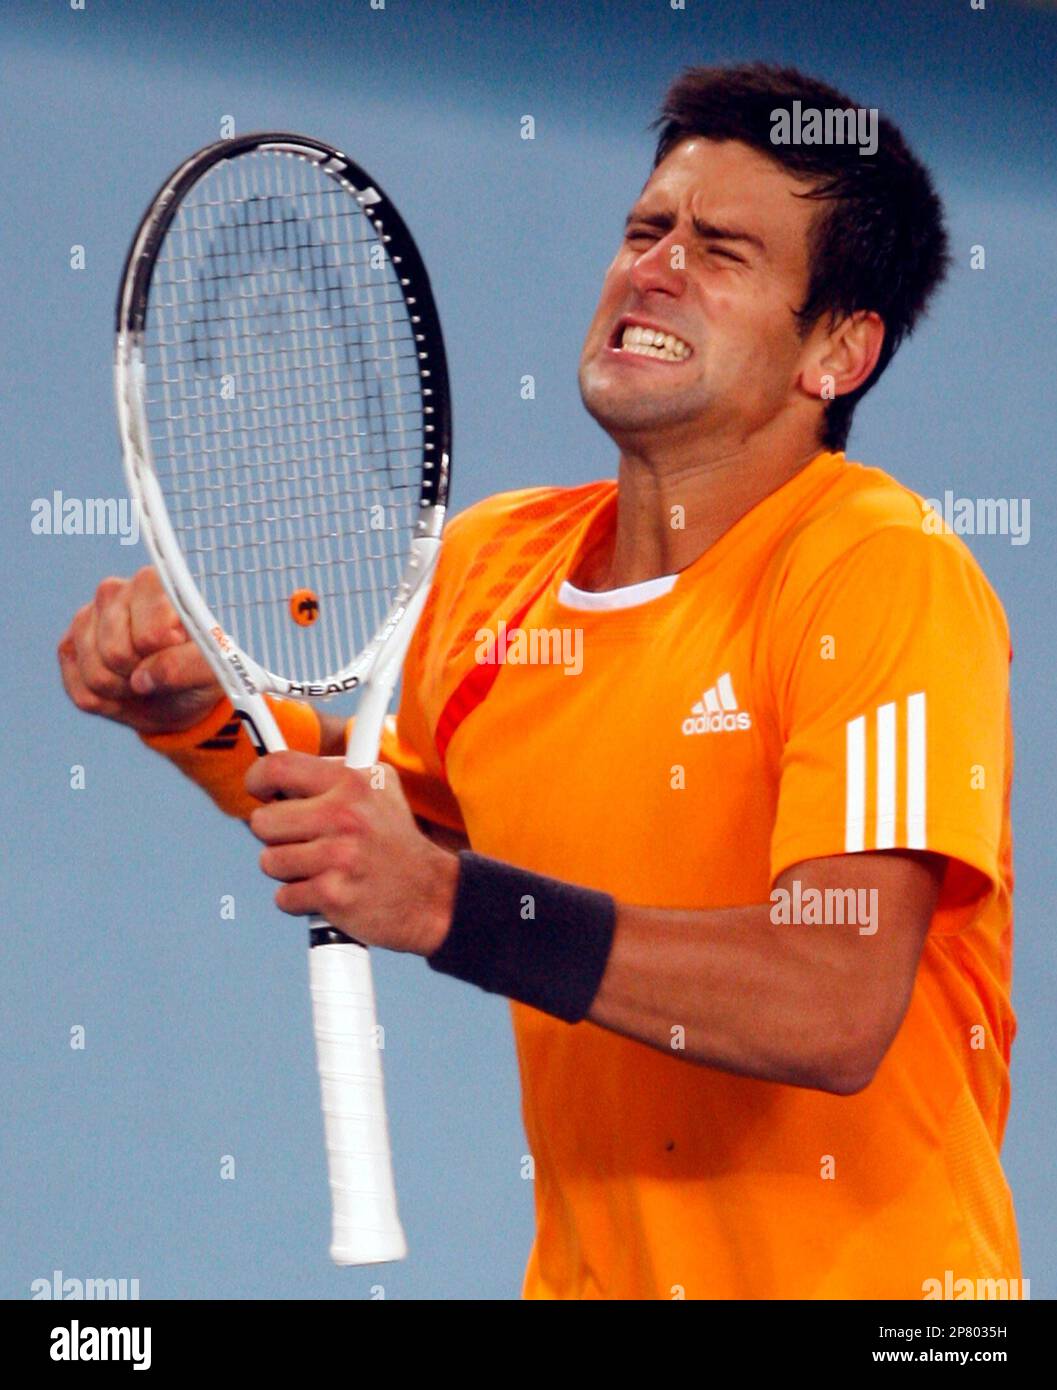 Serbias Novak Djokovic celebrates after winning a point against Croatias Marin Cilic in the final of the China Open tennis tournament held in Beijing Sunday, Oct. 11, 2009